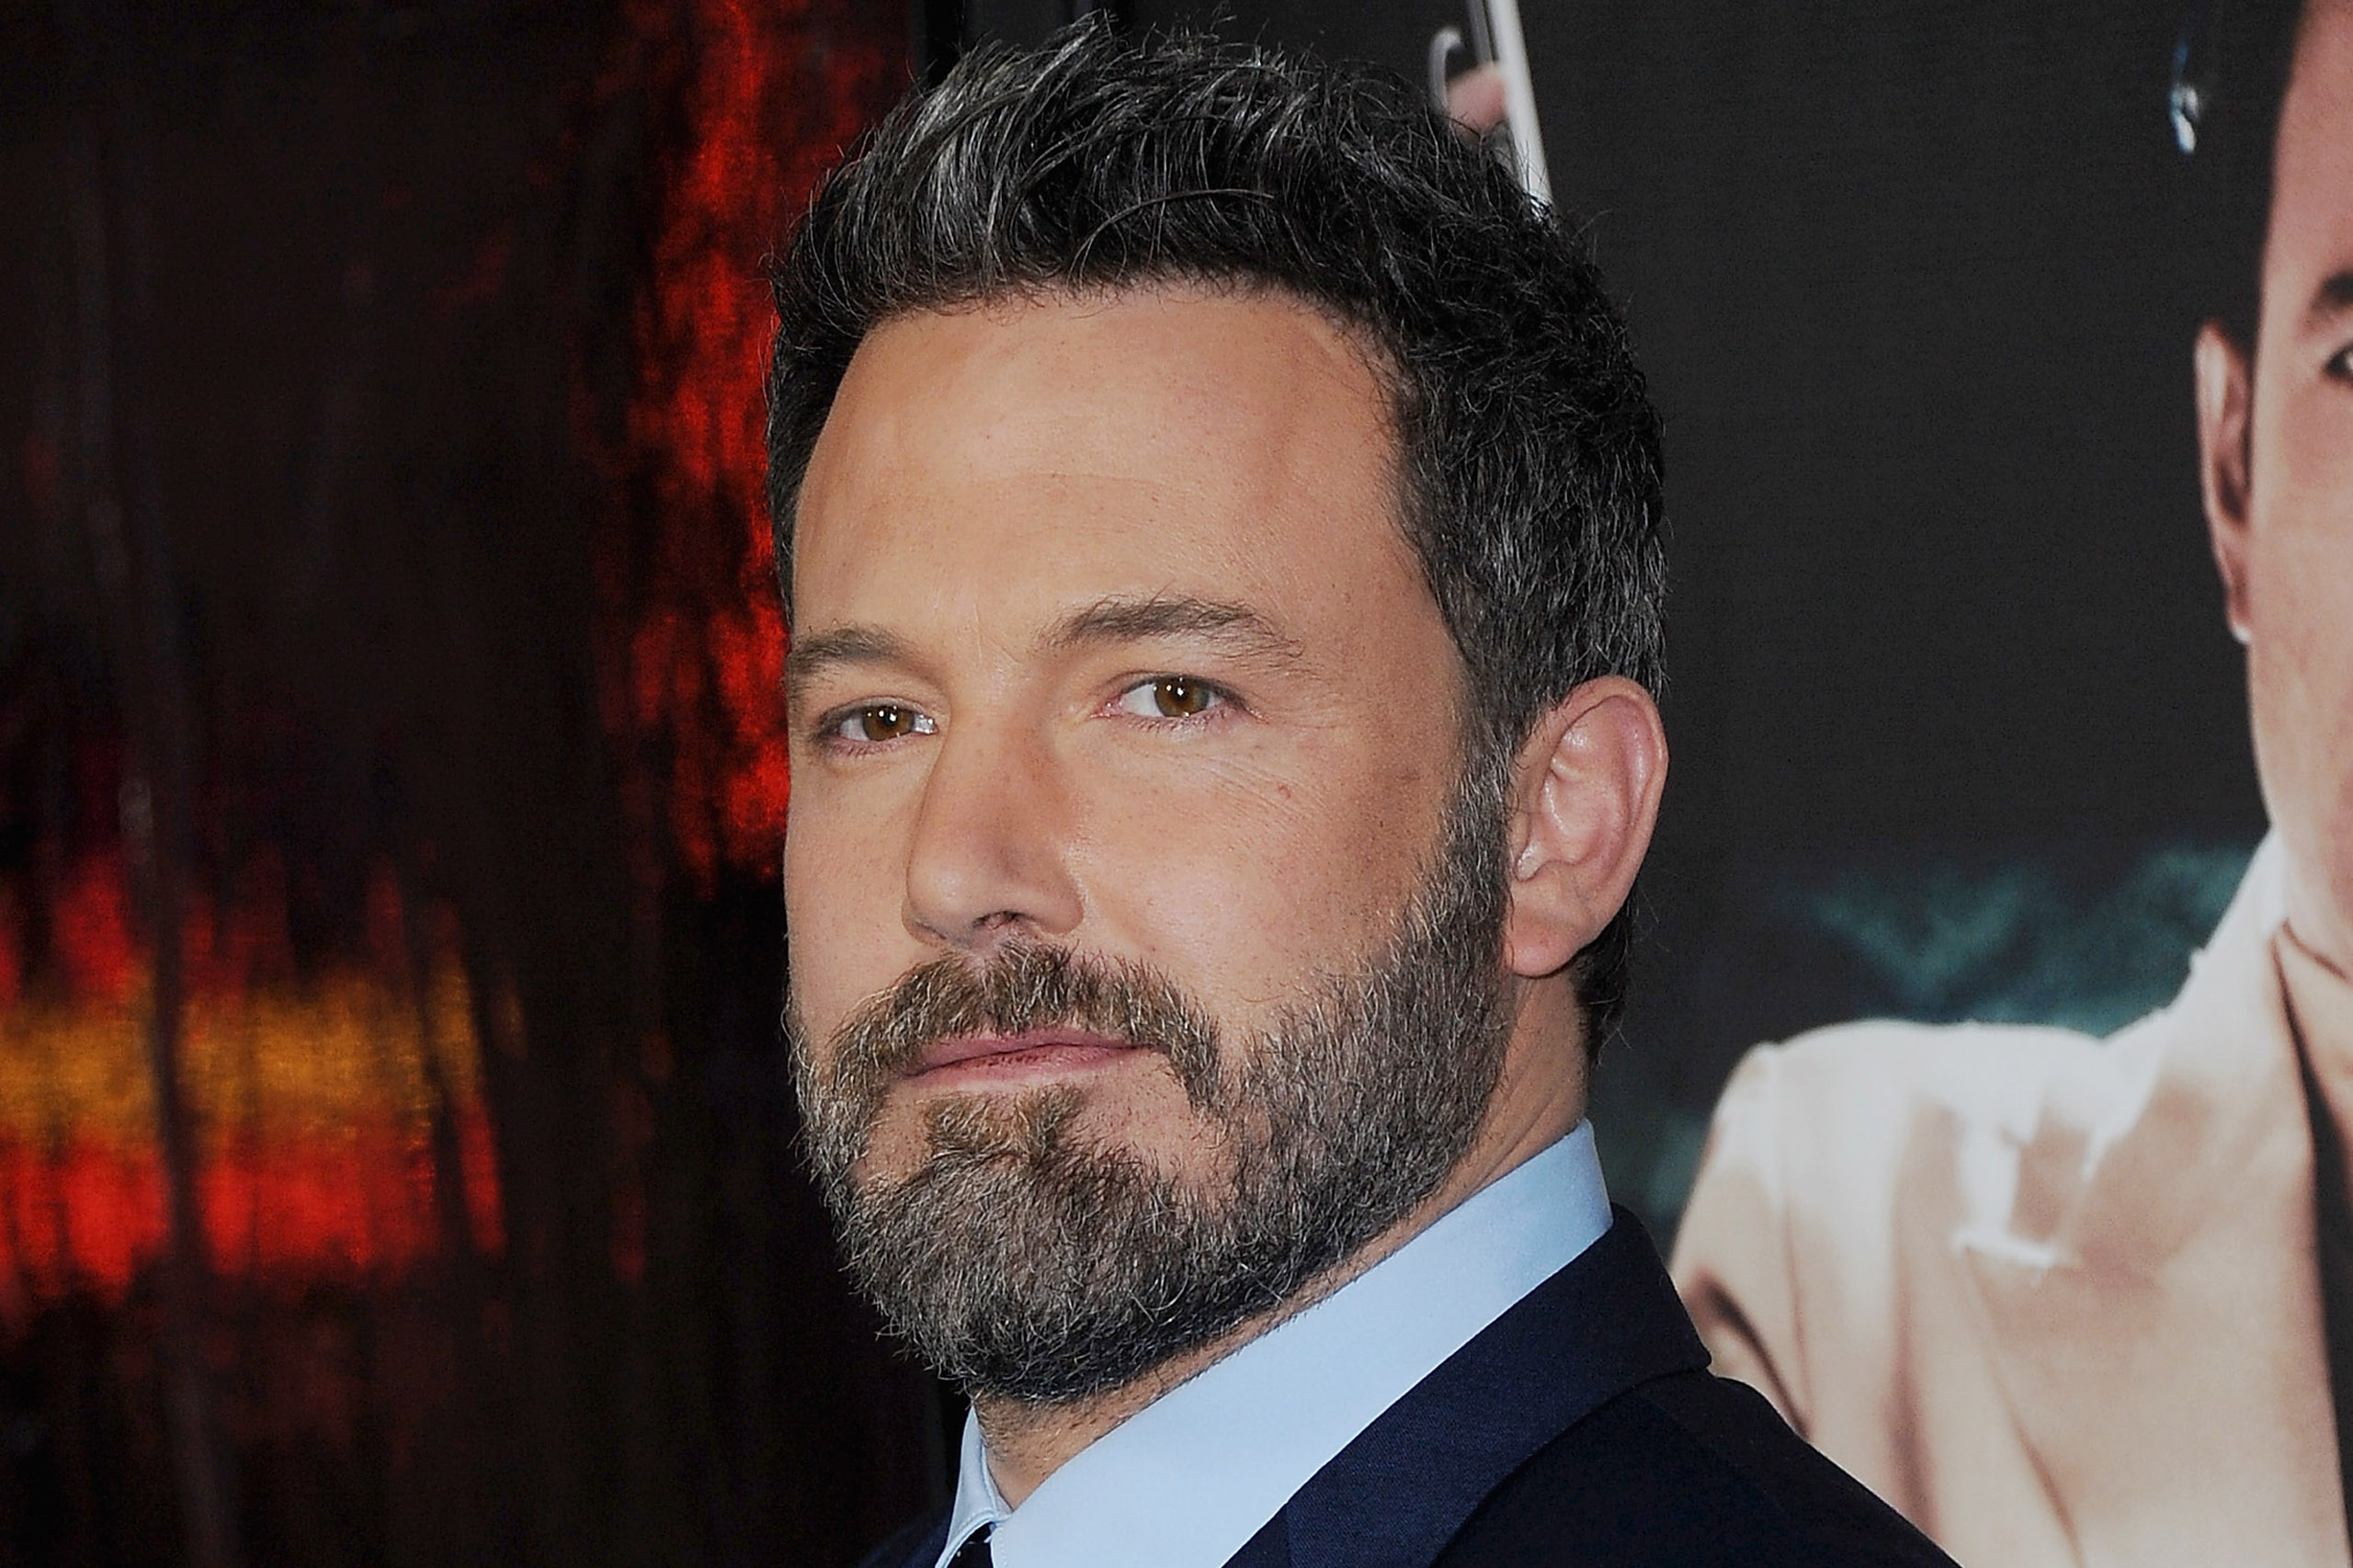 Ben Affleck arrives at the Premiere of "Live By Night" at TCL Chinese Theatre in Hollywood, California on Jan. 9, 2017. (Jon Kopaloff—FilmMagic/Getty Images)